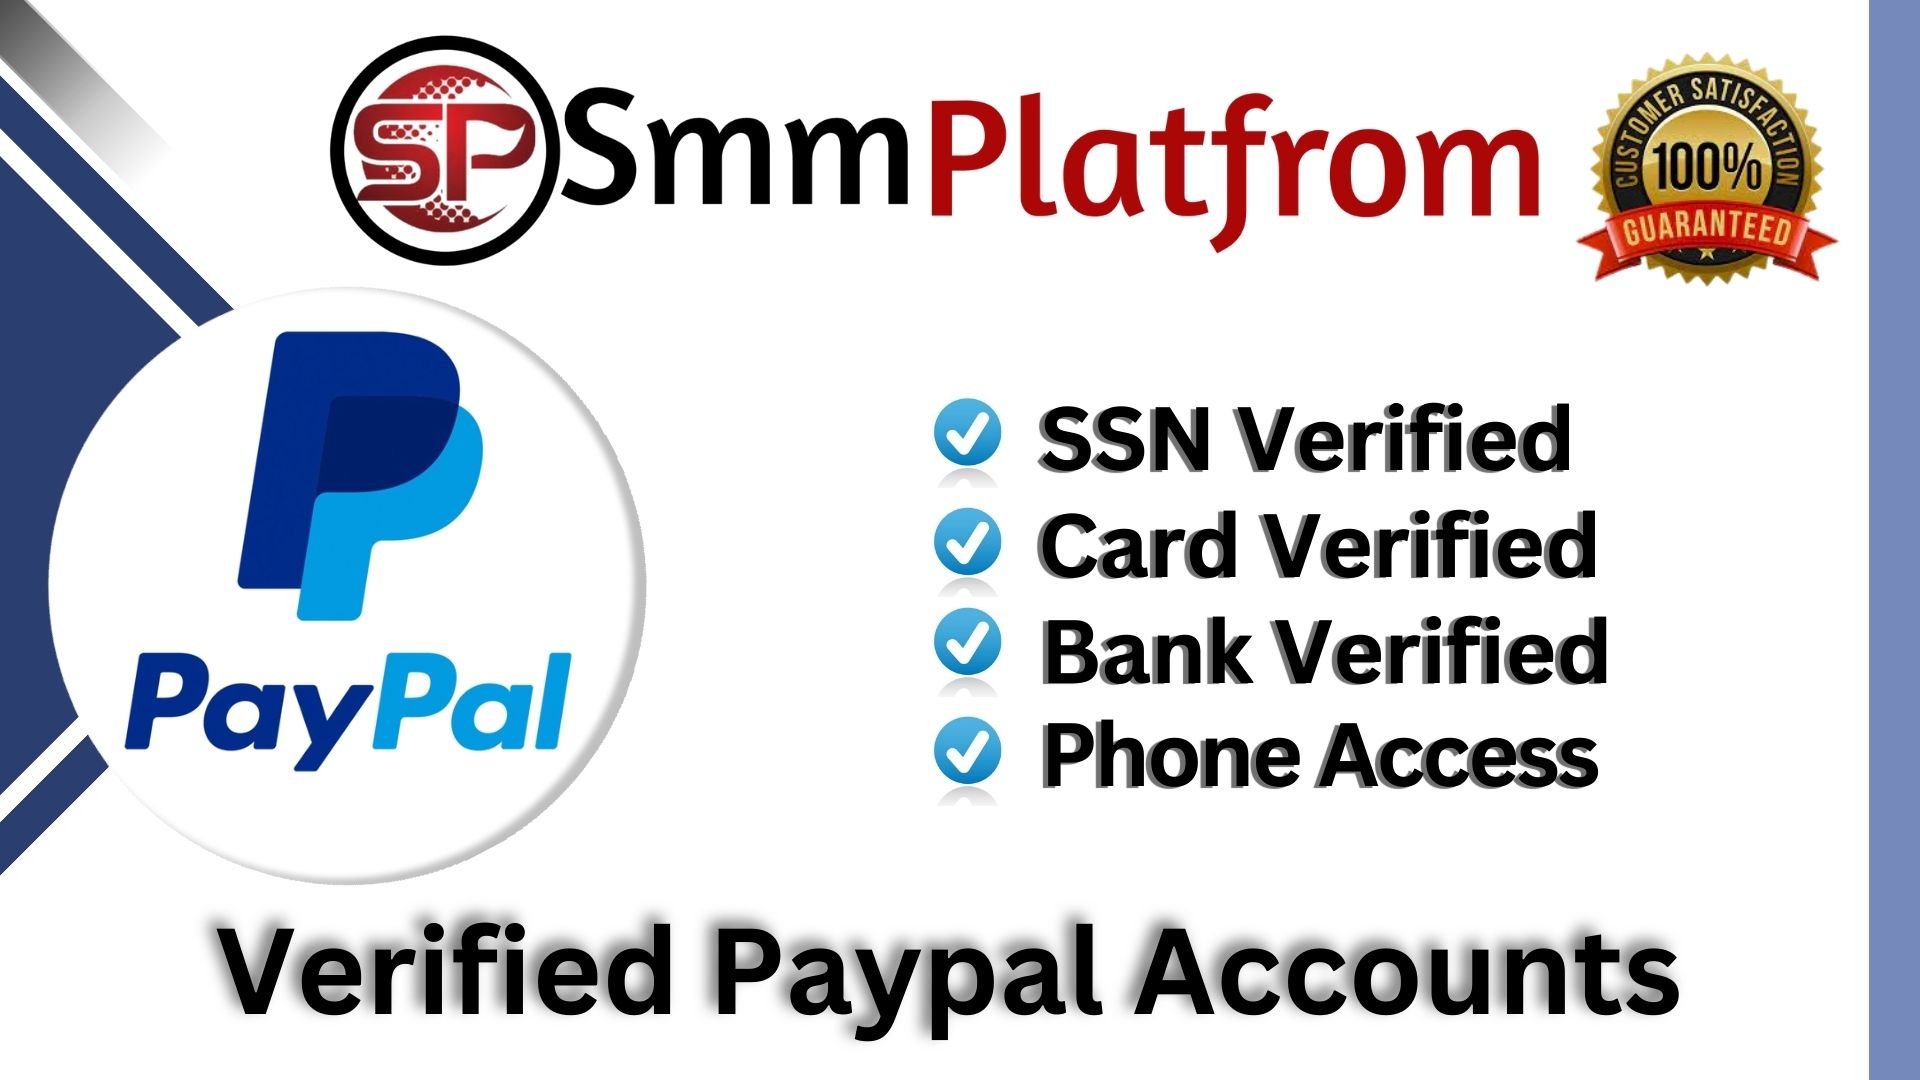 Buy Verified PayPal Accounts - 100% Quick Delivery Service